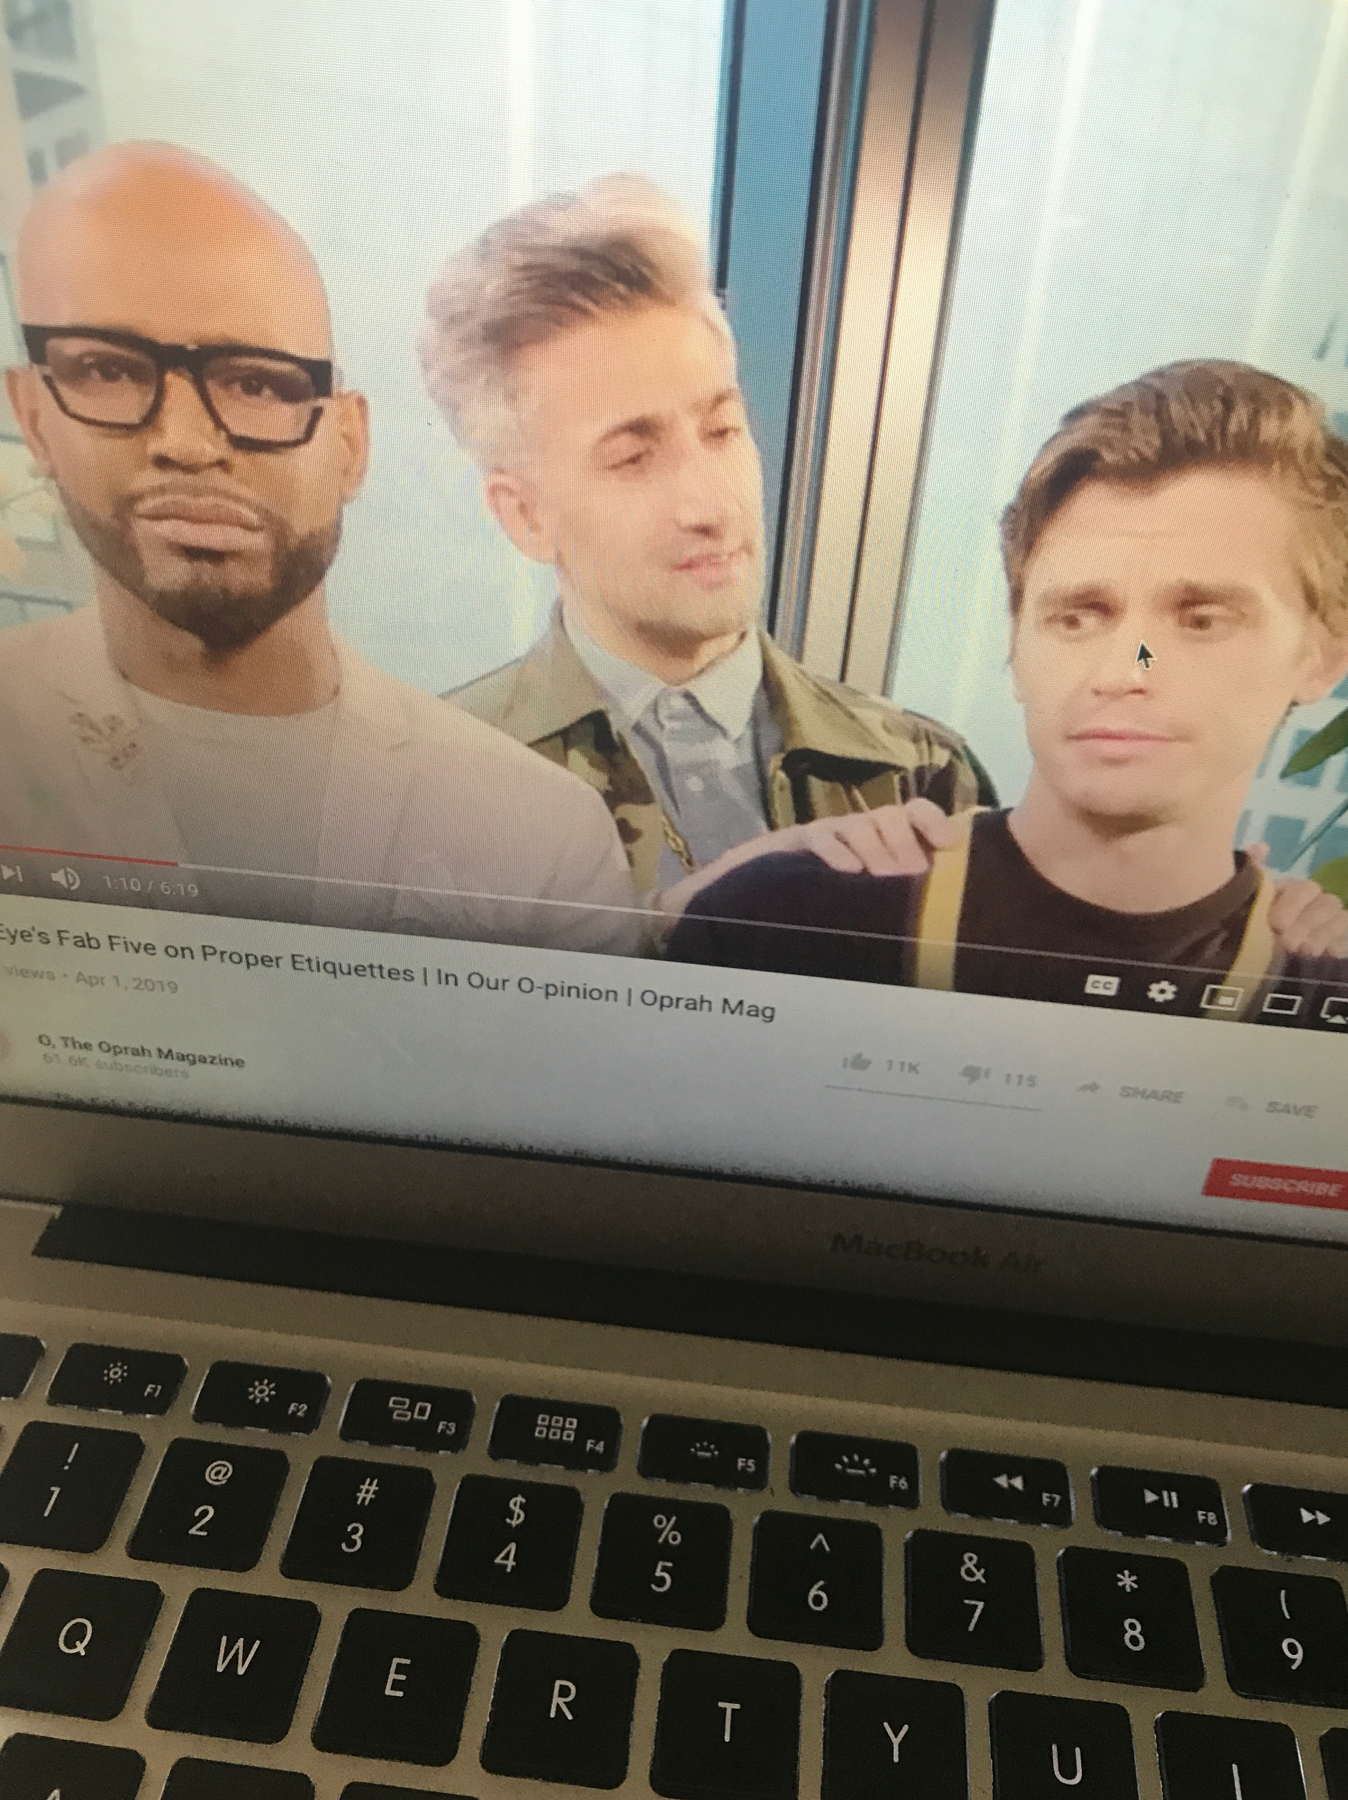 I love when you pause videos and everyone is such such a mood 